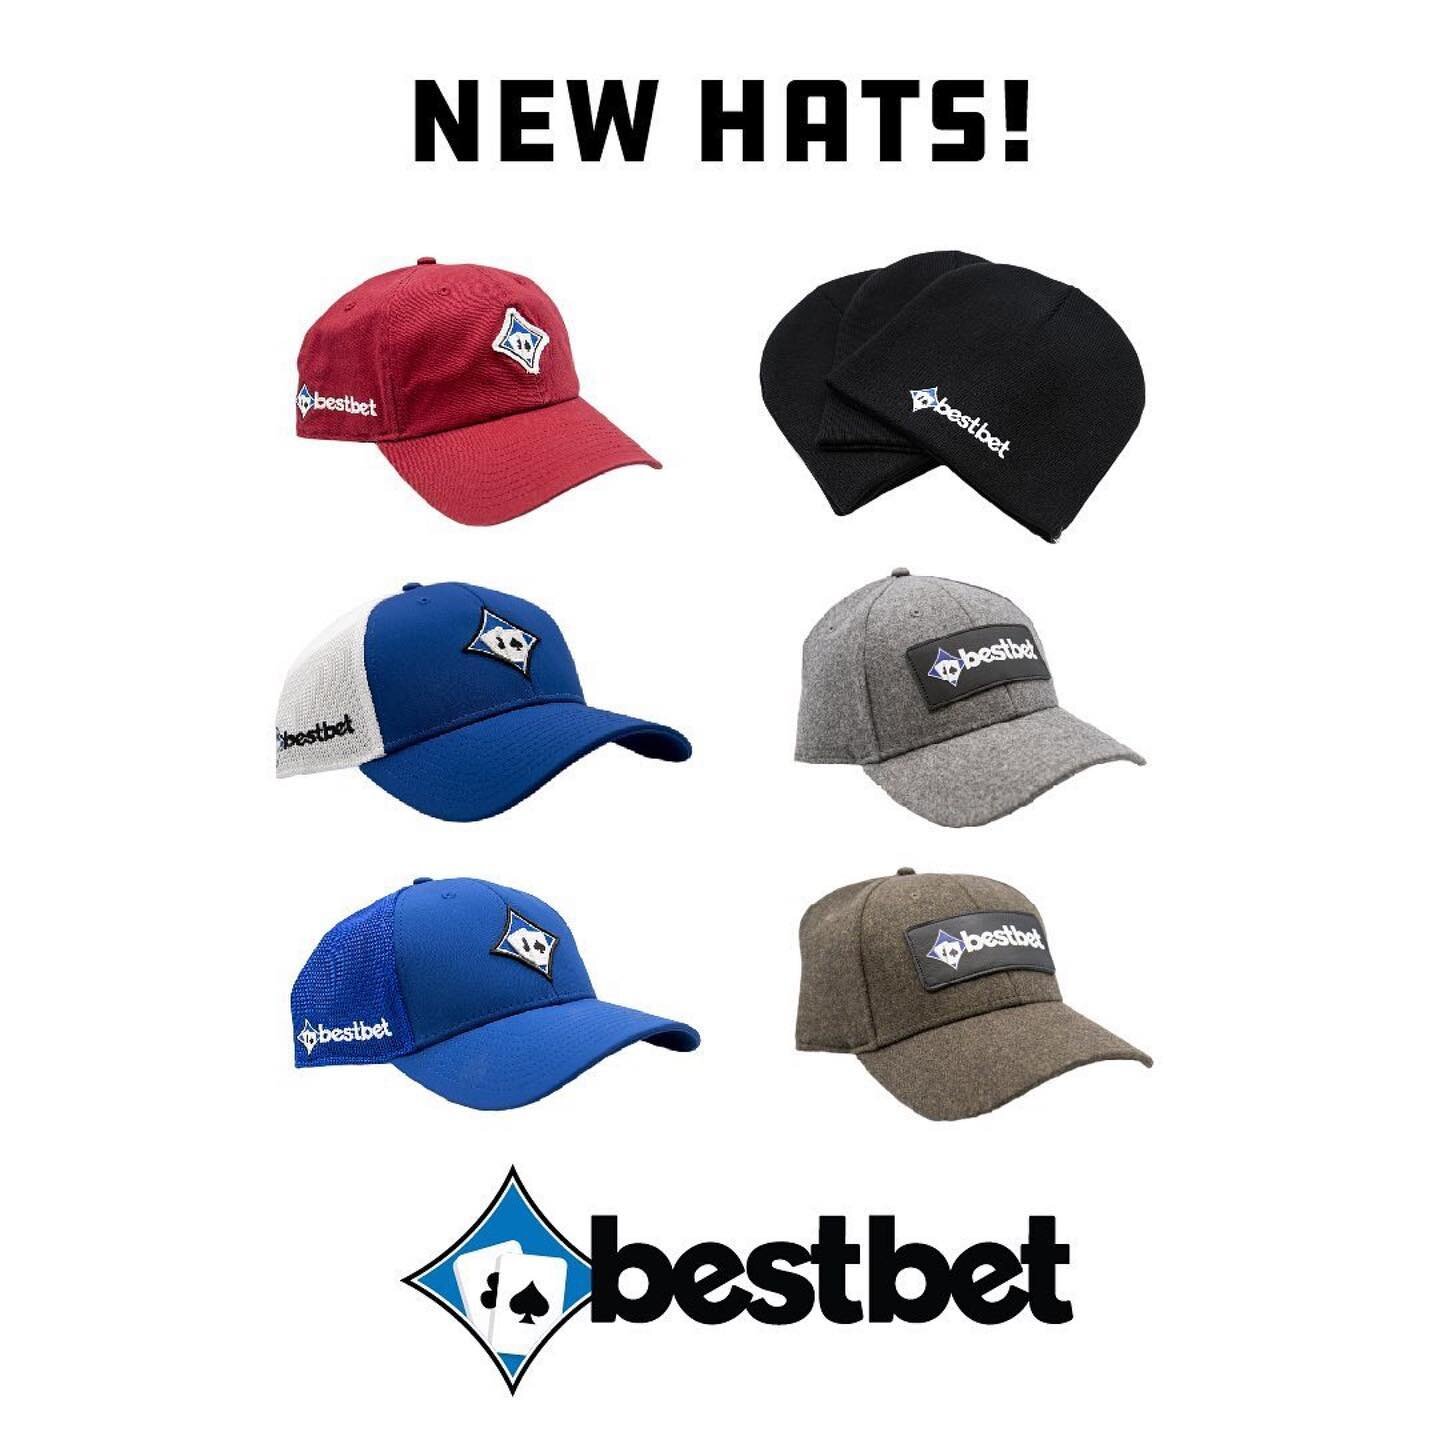 New hats in stock at @bestbetjax! Stop by and see what&rsquo;s going on at Jacksonville&rsquo;s #1 spot for poker and gaming! #BestBet #WSOP #Poker #Gaming #Jax #Dobetter #EveryHatHasAStory #DOMEhats #HBHH #Holdem #FinalTable #Win